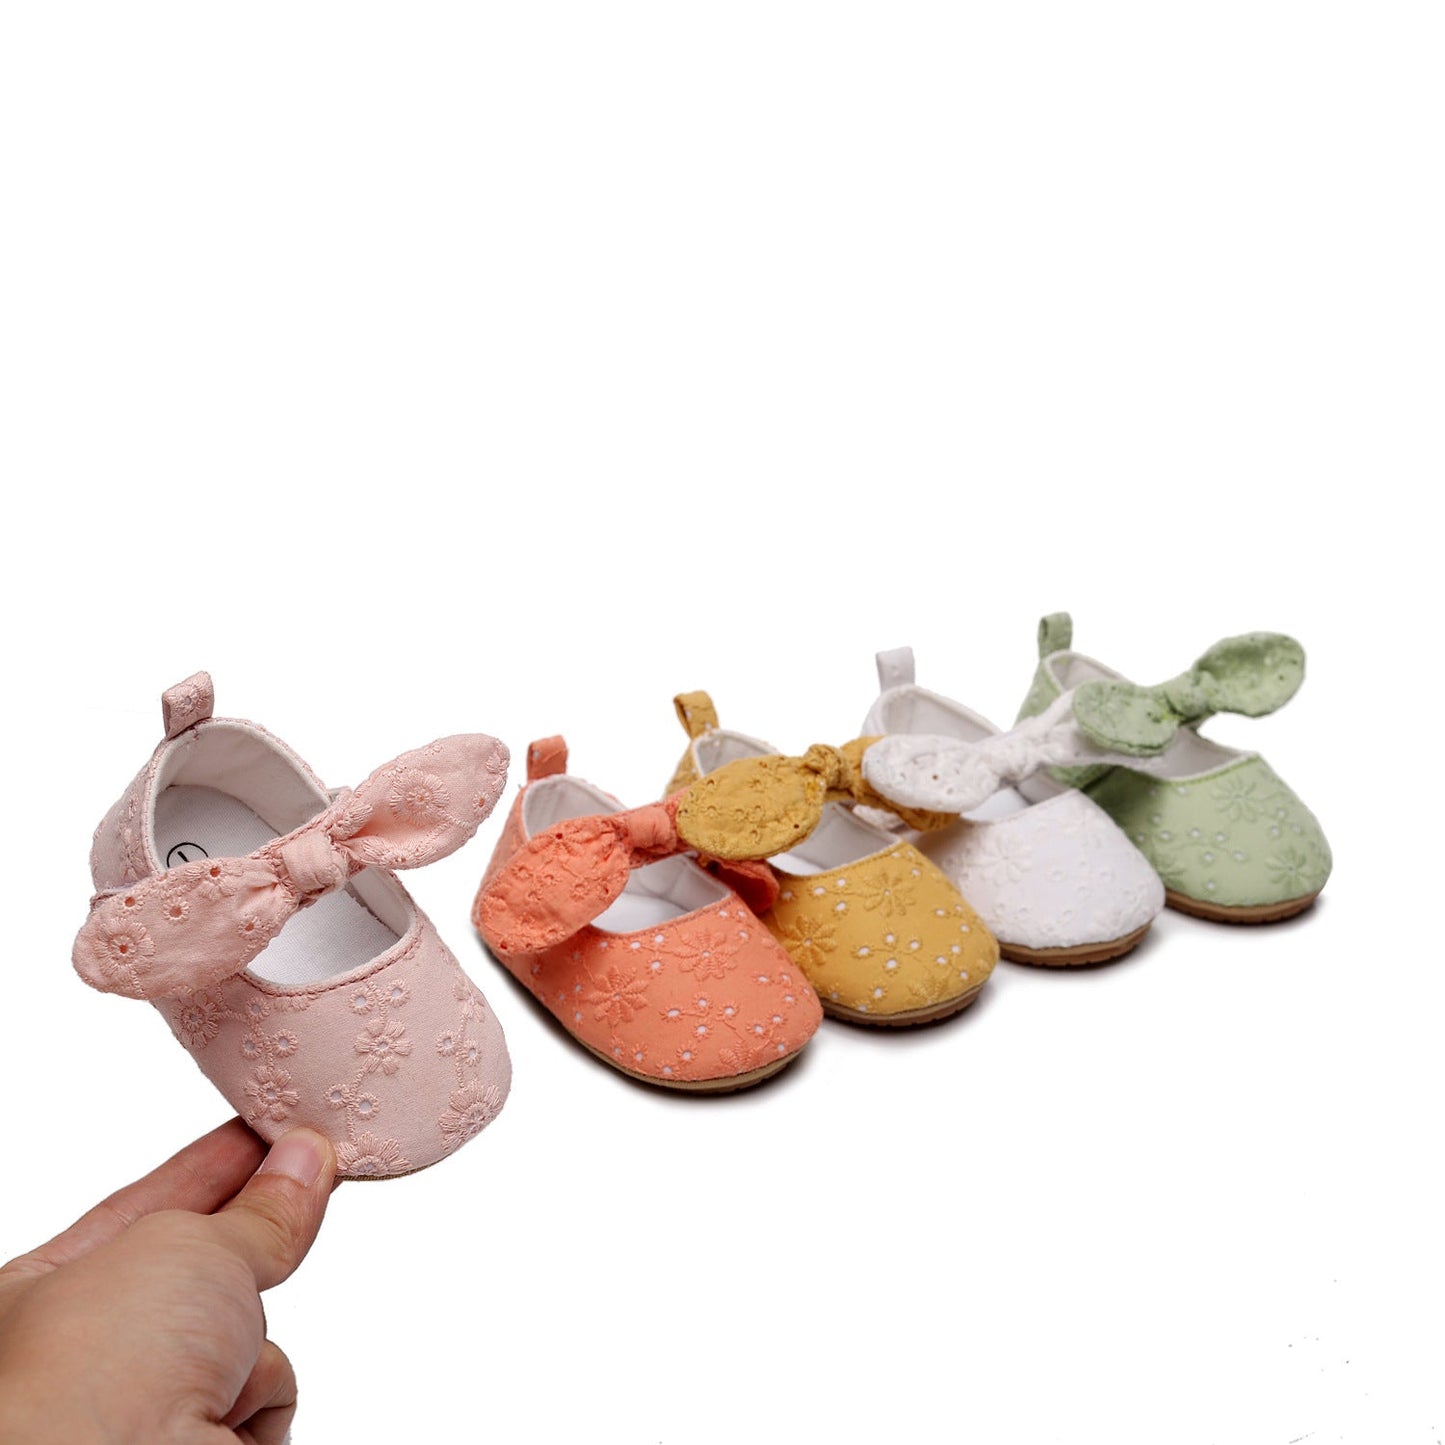 Baby Cute Bowknot Shoes Pawlulu